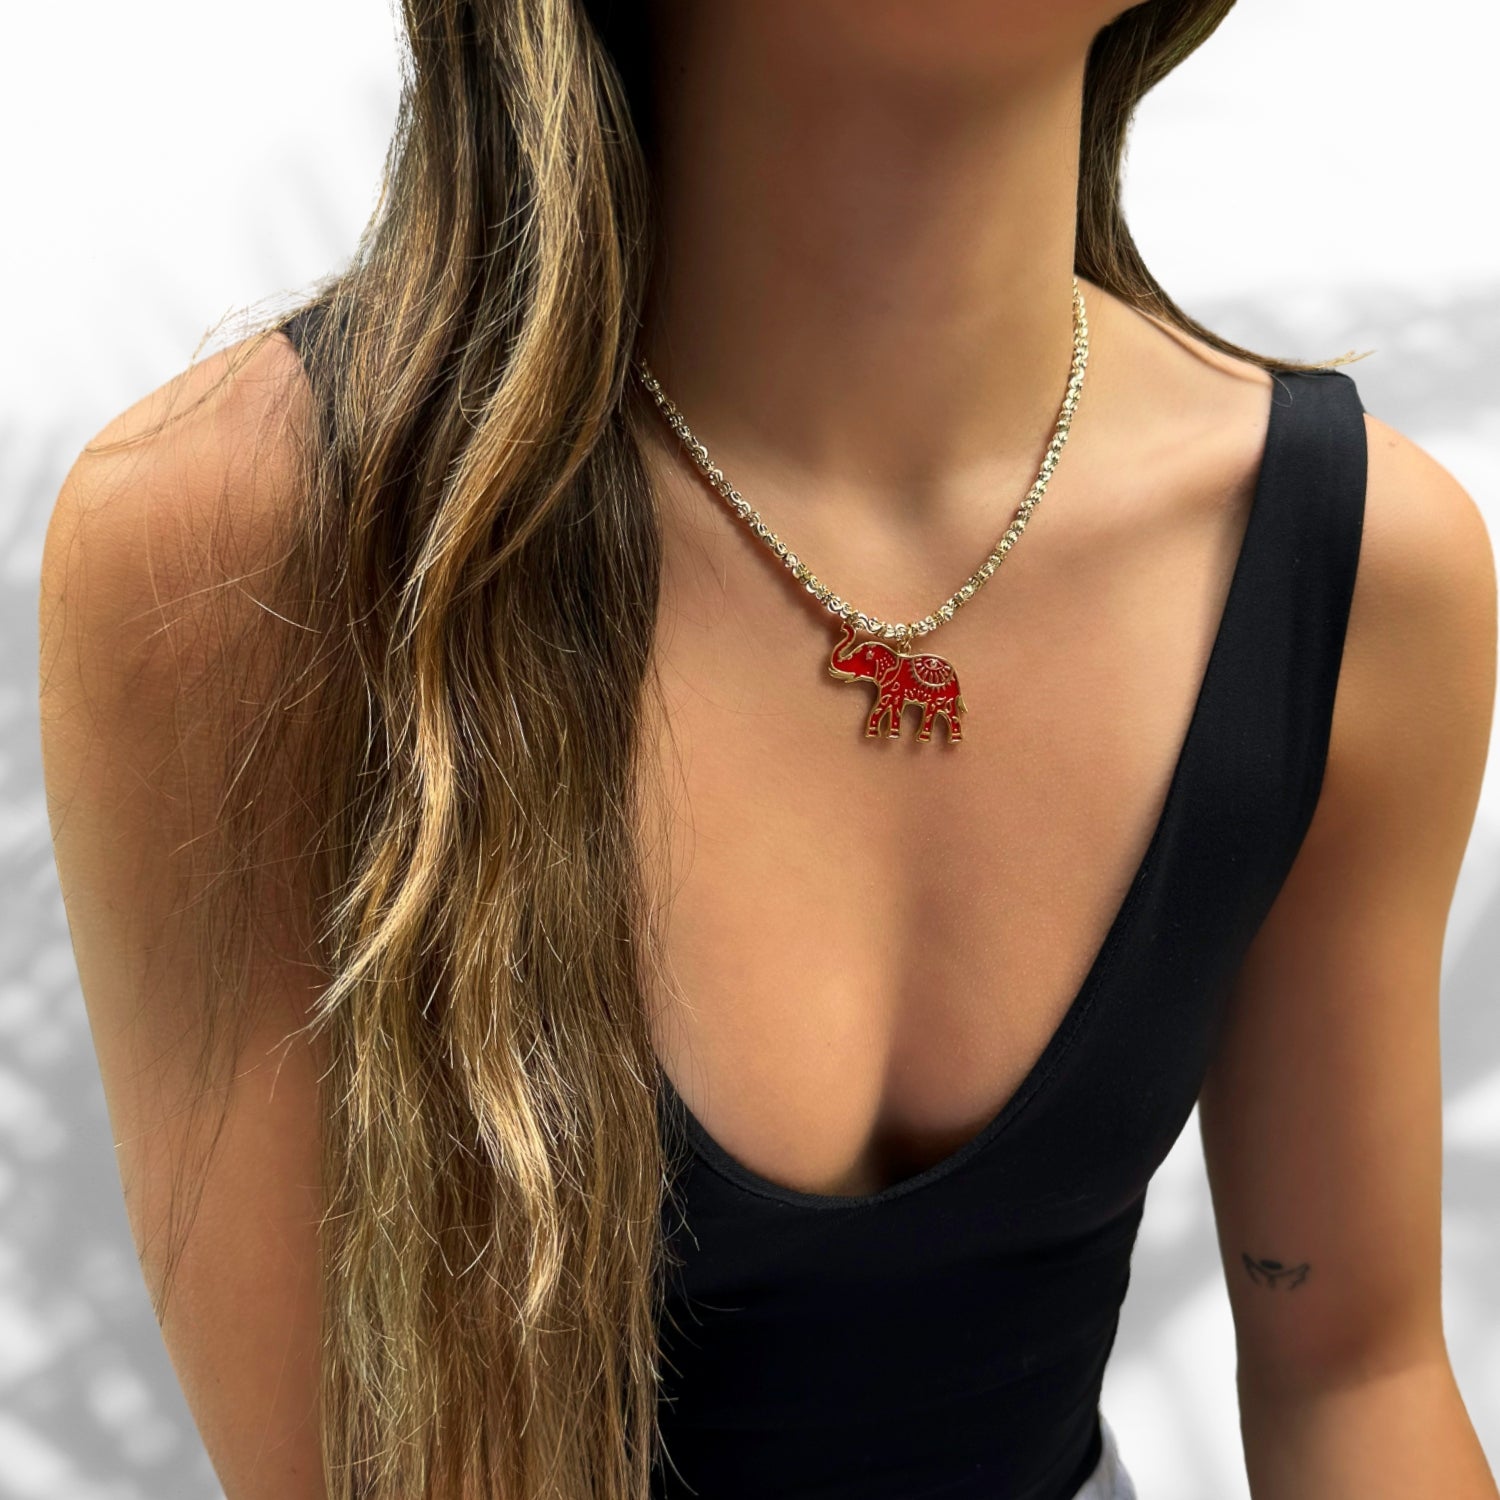 Powerful Red Elephant Gold Chain Necklace